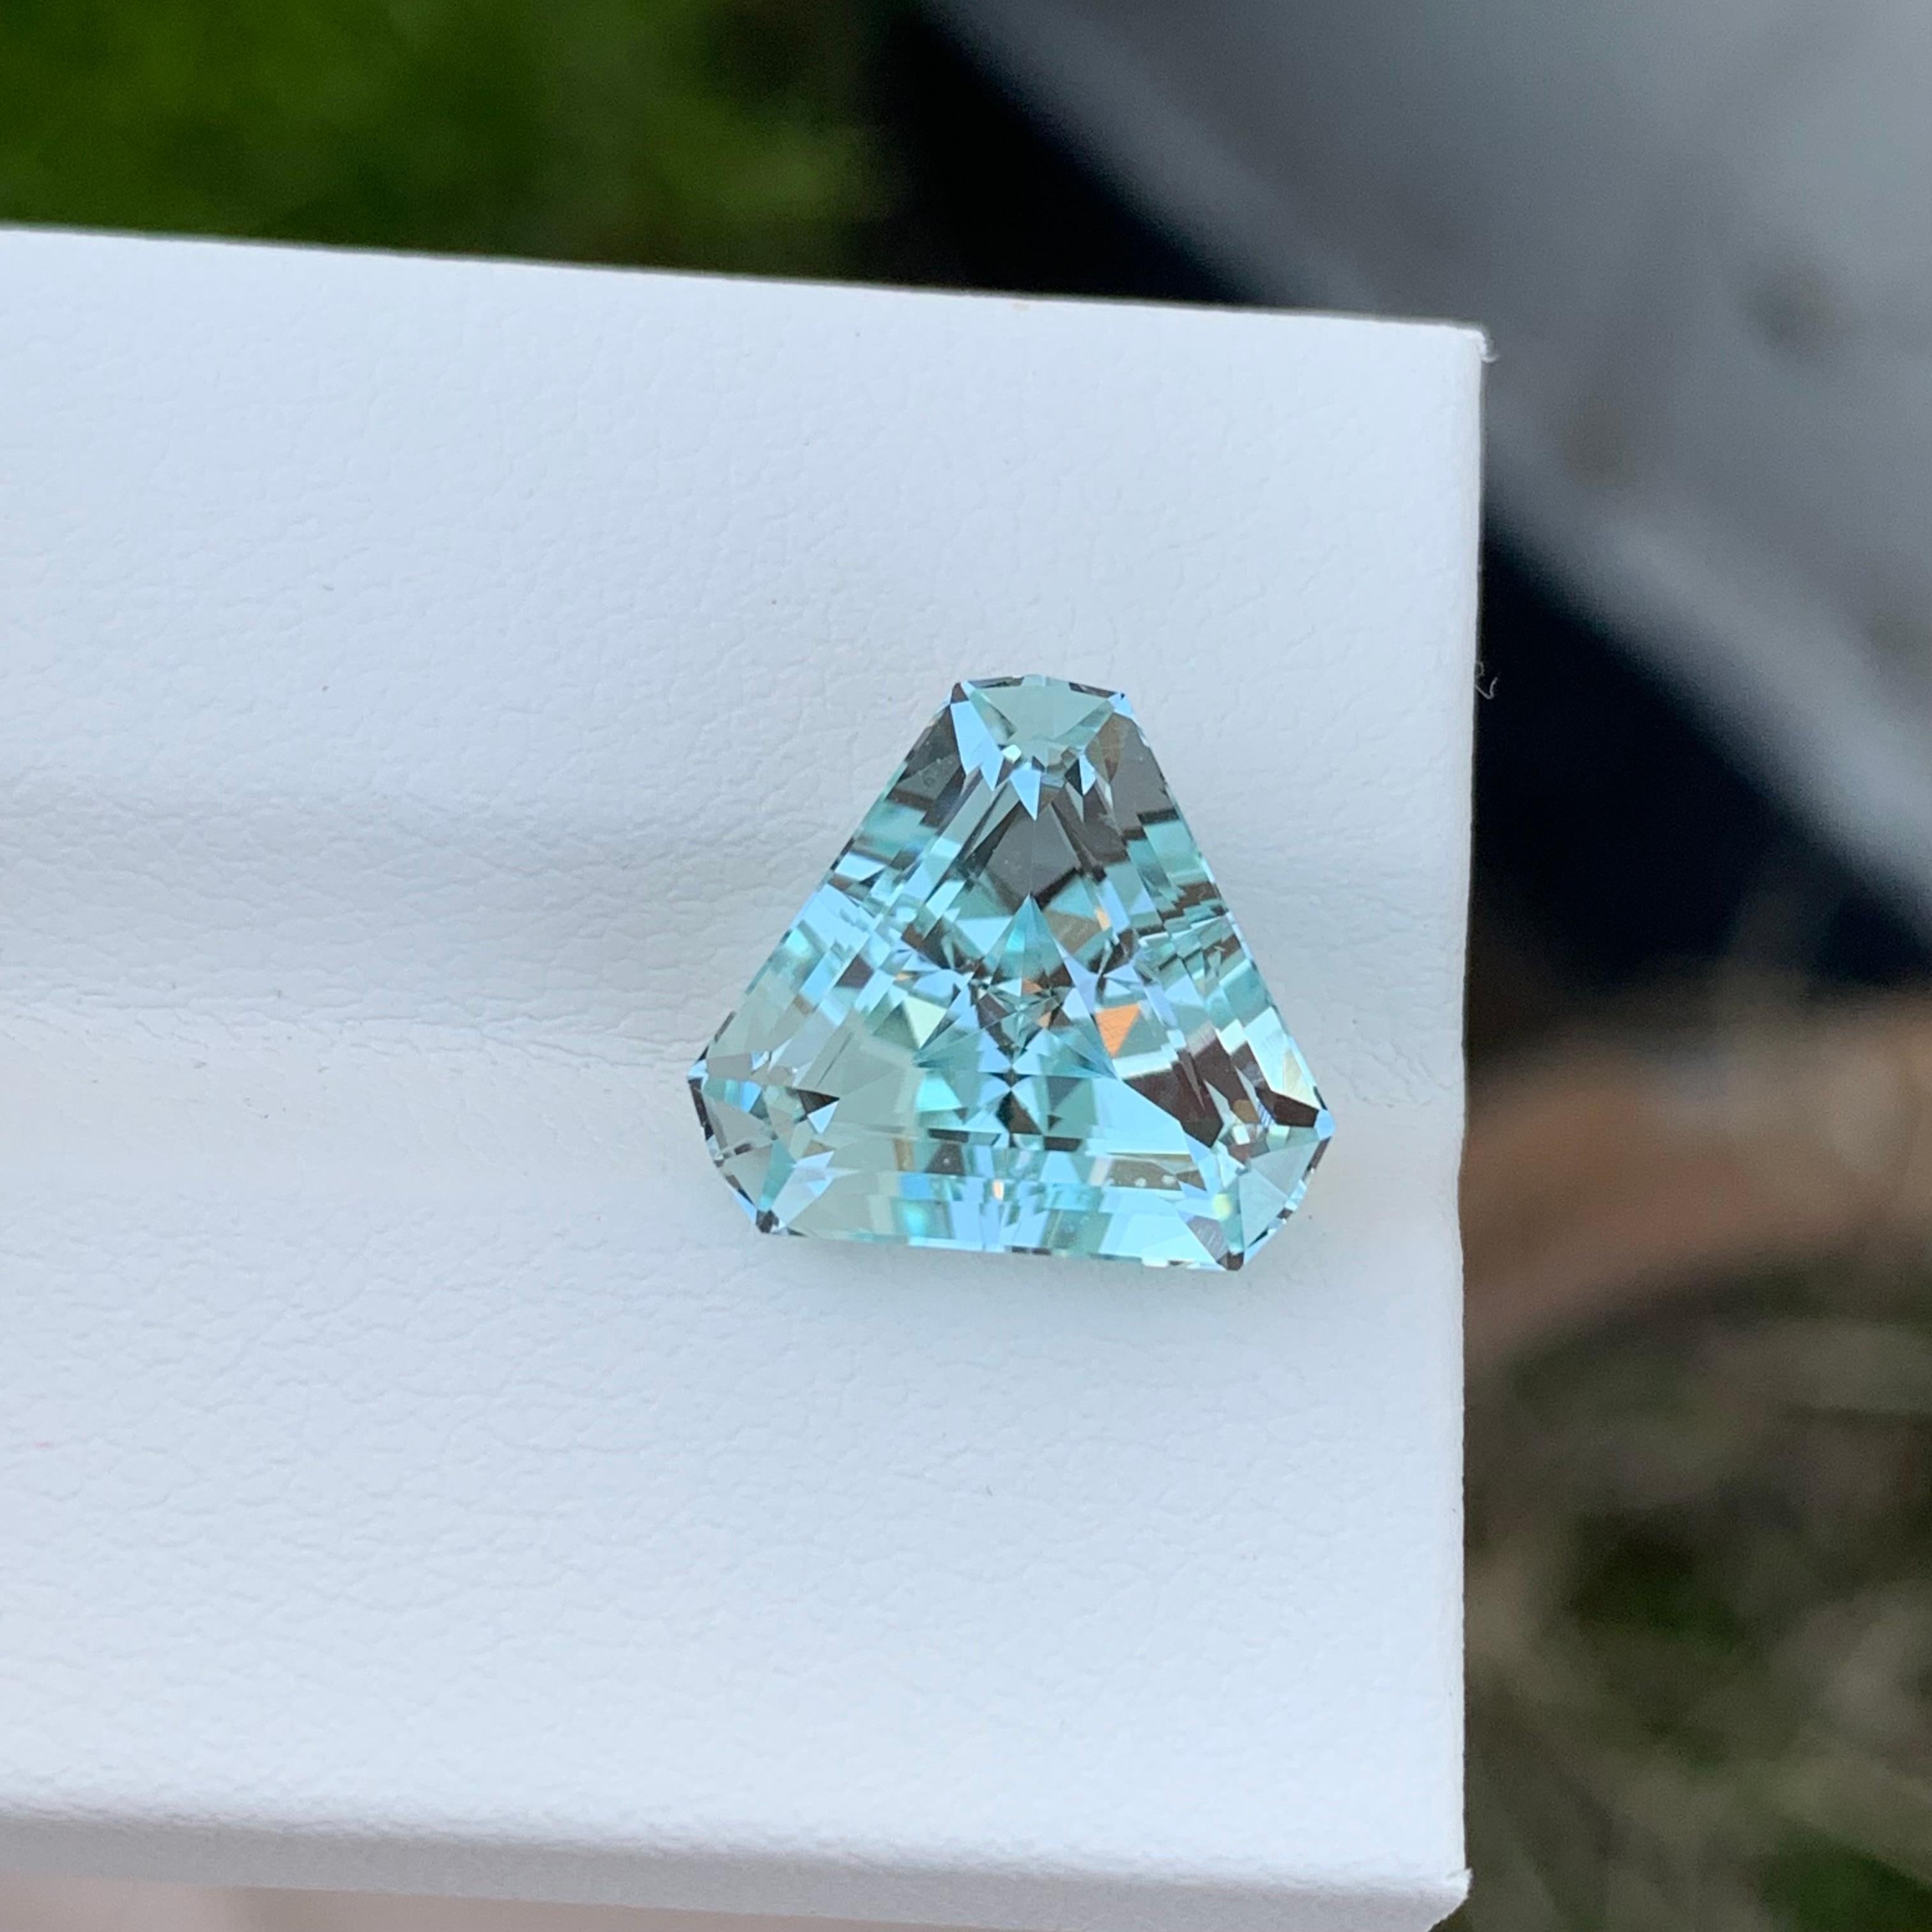 Loose Aquamarine
Weight: 5.50 Carat
Dimension: 11.4 x 11.4 x 7.3 Mm
Colour : Pale Blue
Origin: Shigar Valley, Pakistan
Treatment: Non
Certificate : On Demand
Shape: Trillion 

Aquamarine is a captivating gemstone known for its enchanting blue-green